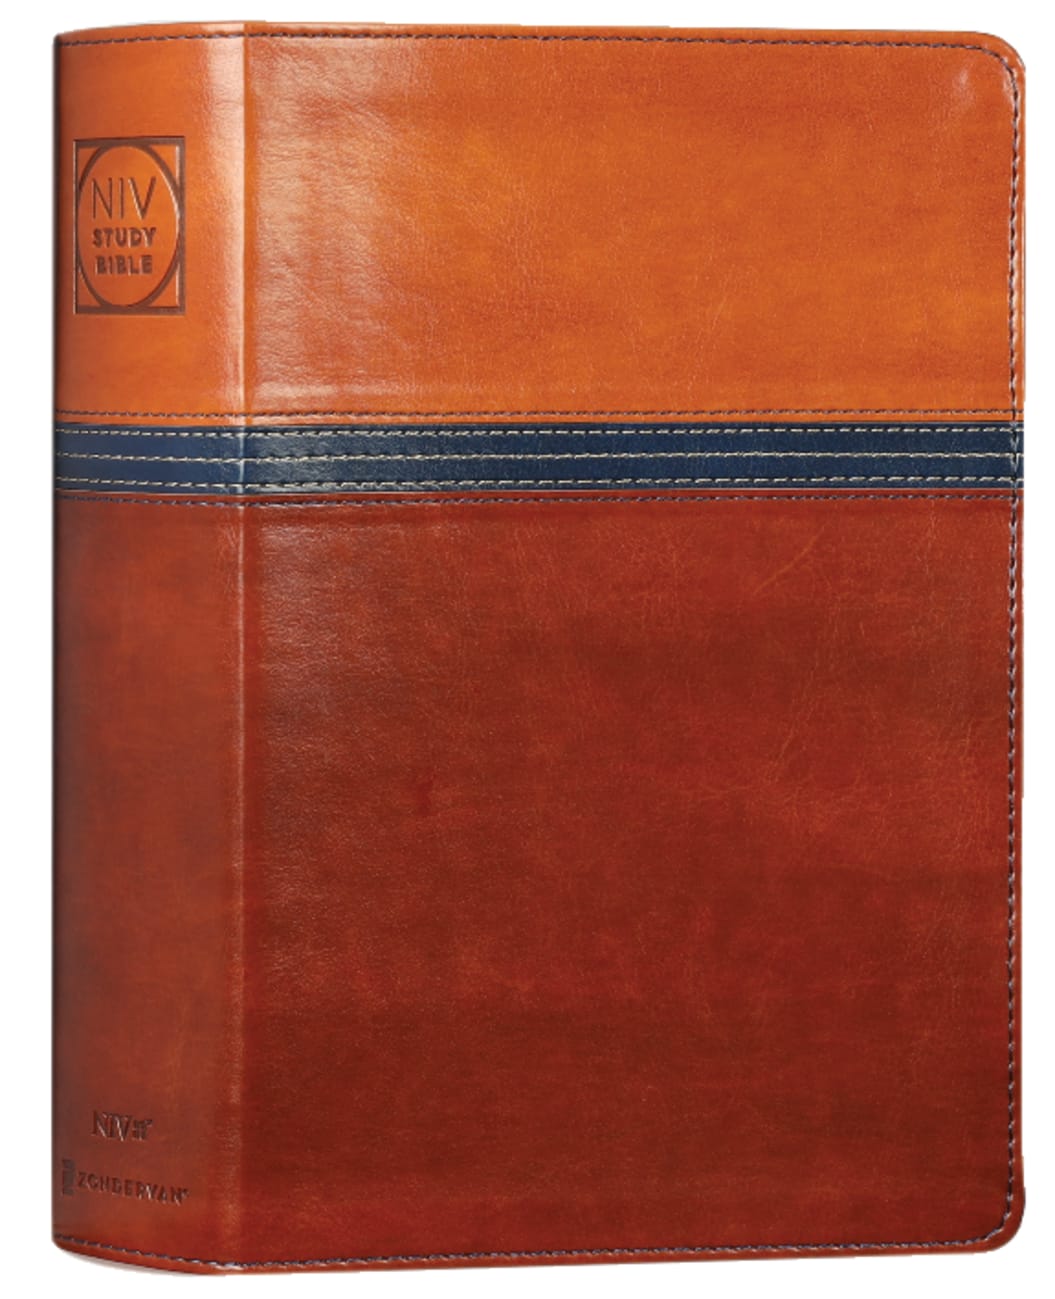 NIV Study Bible Personal Size Brown/Blue Indexed (Red Letter Edition) Fully Revised Edition (2020) Premium Imitation Leather